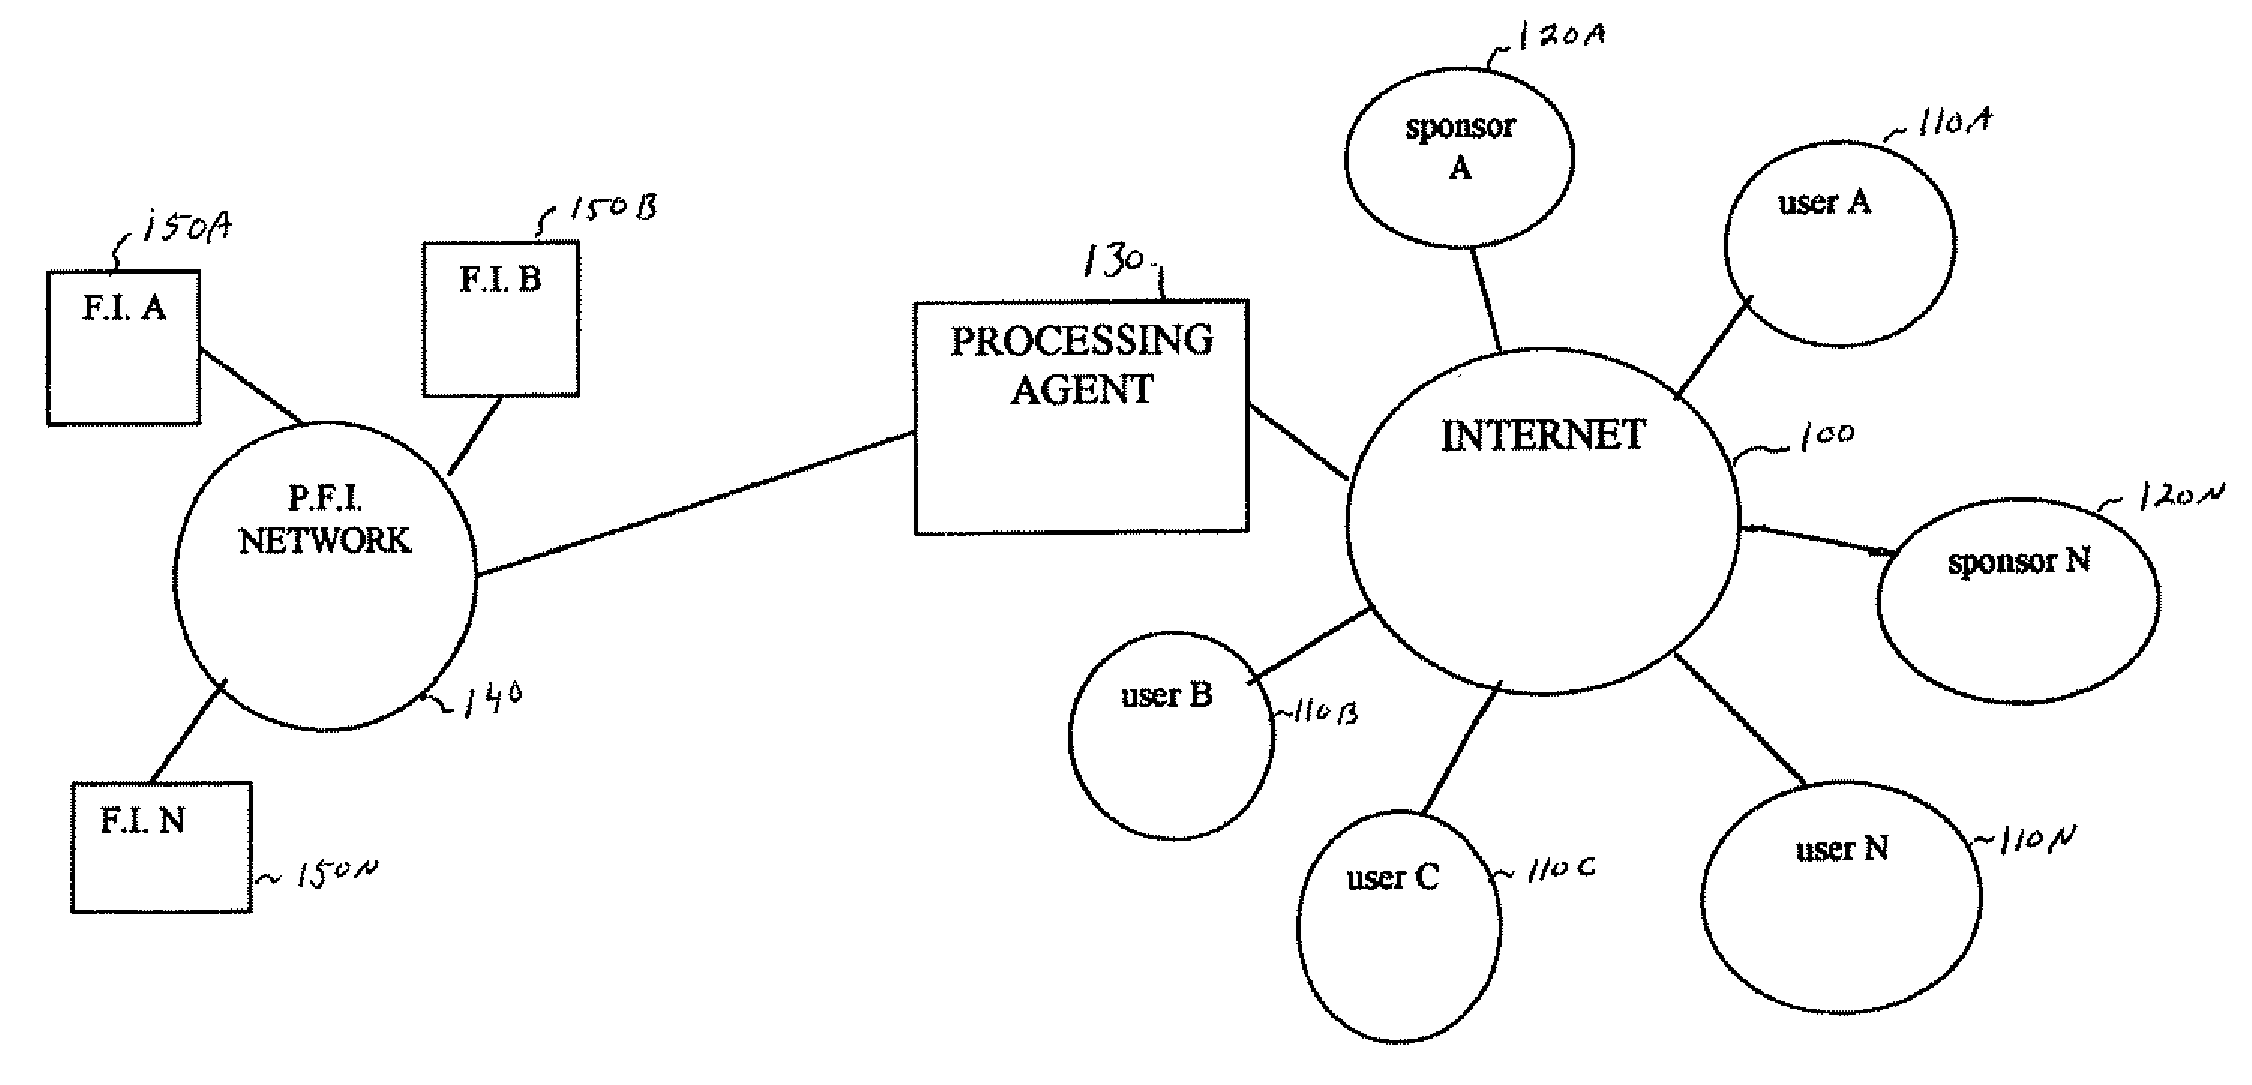 Systems and Methods for Hold Periods Based Upon Risk Analysis